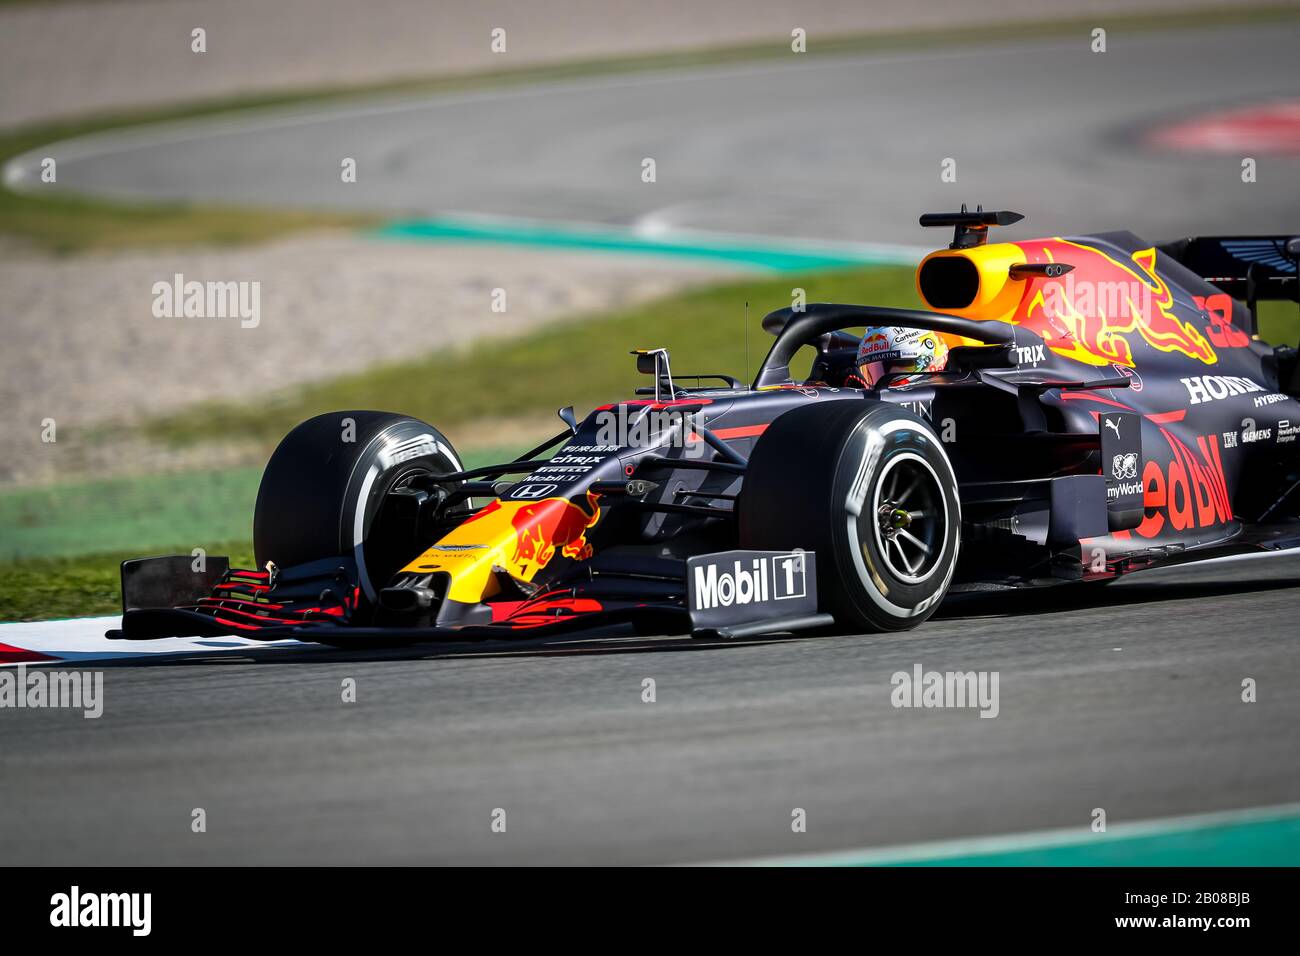 Max Verstappen of RedBull Racing seen in action during the afternoon session of the first day of F1 Test Days in Montmelo circuit. Stock Photo